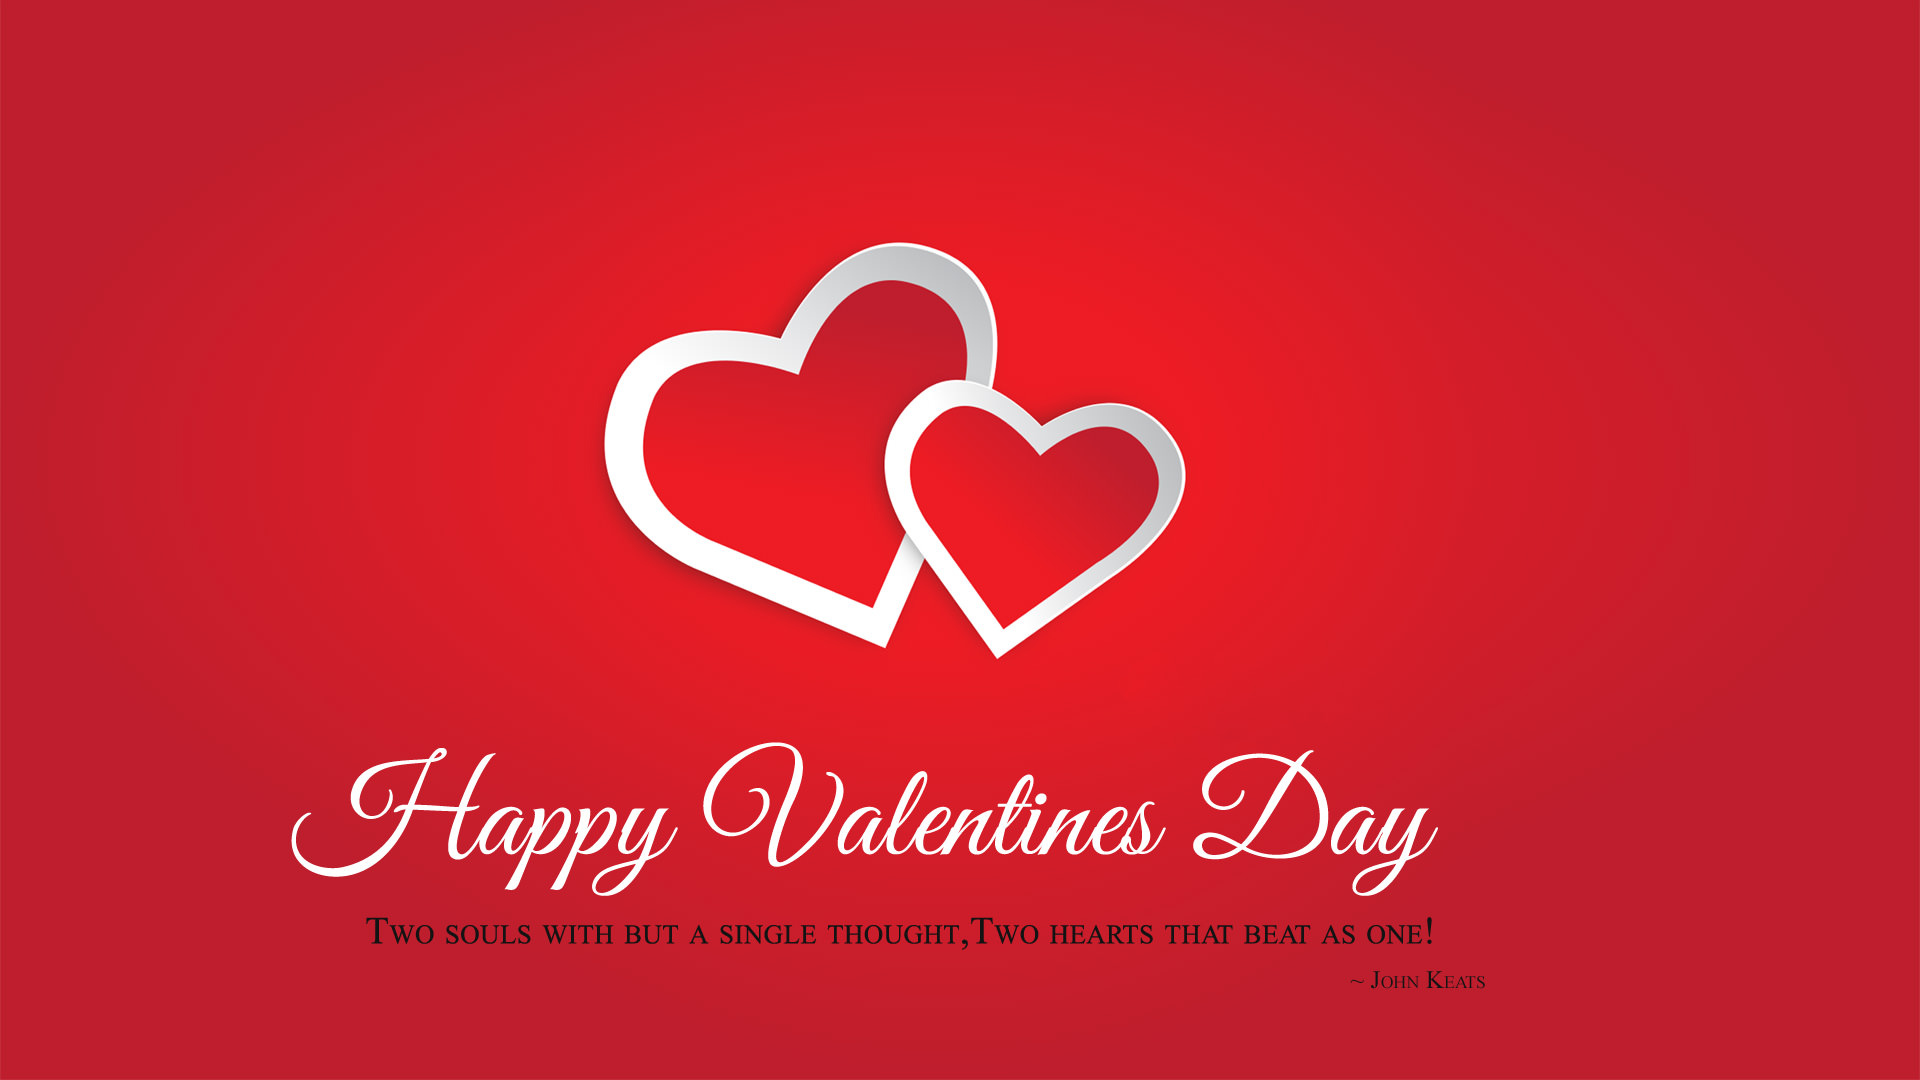 14 Feb Happy Valentines Day Wallpaper Full HD Special Love Images